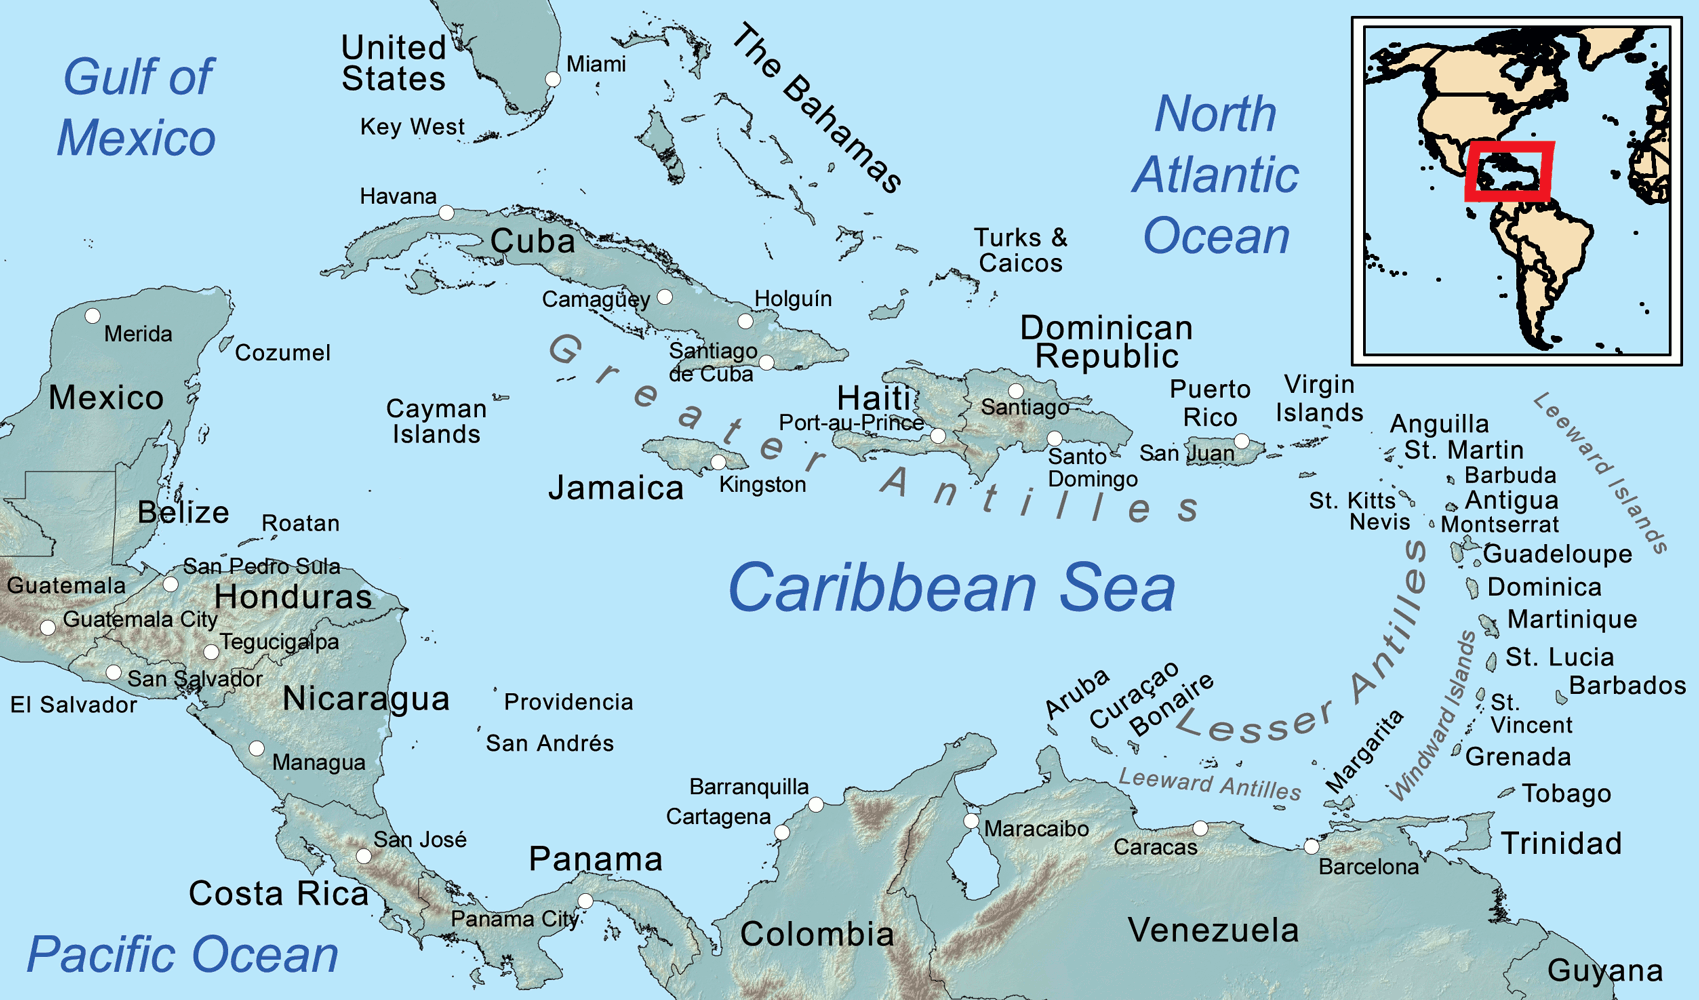 The Caribbean Sea, and surrounding geographical islands